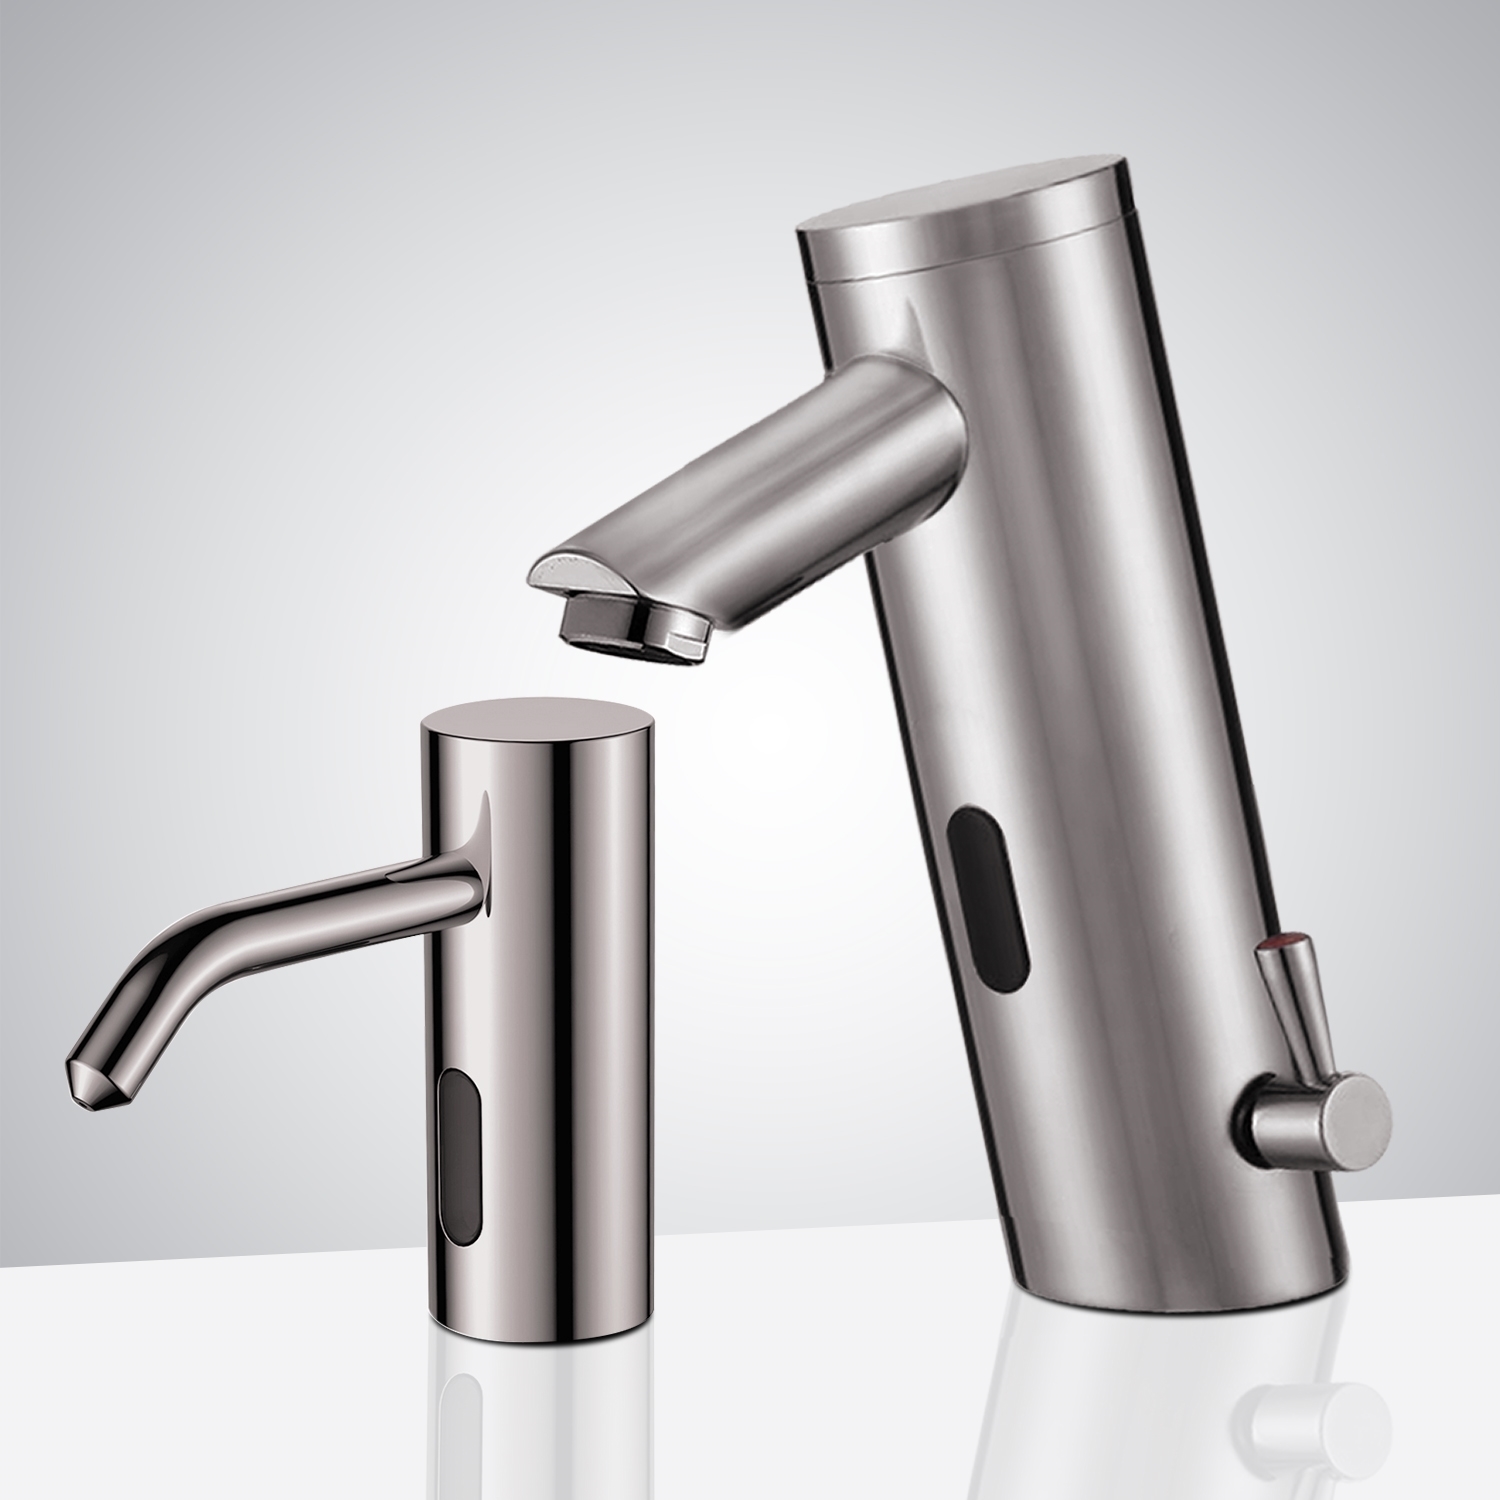 Fontana Platinum Brushed Nickel Commercial Automatic Temperature Control Thermostatic Sensor Tap with Matching Soap Dispenser